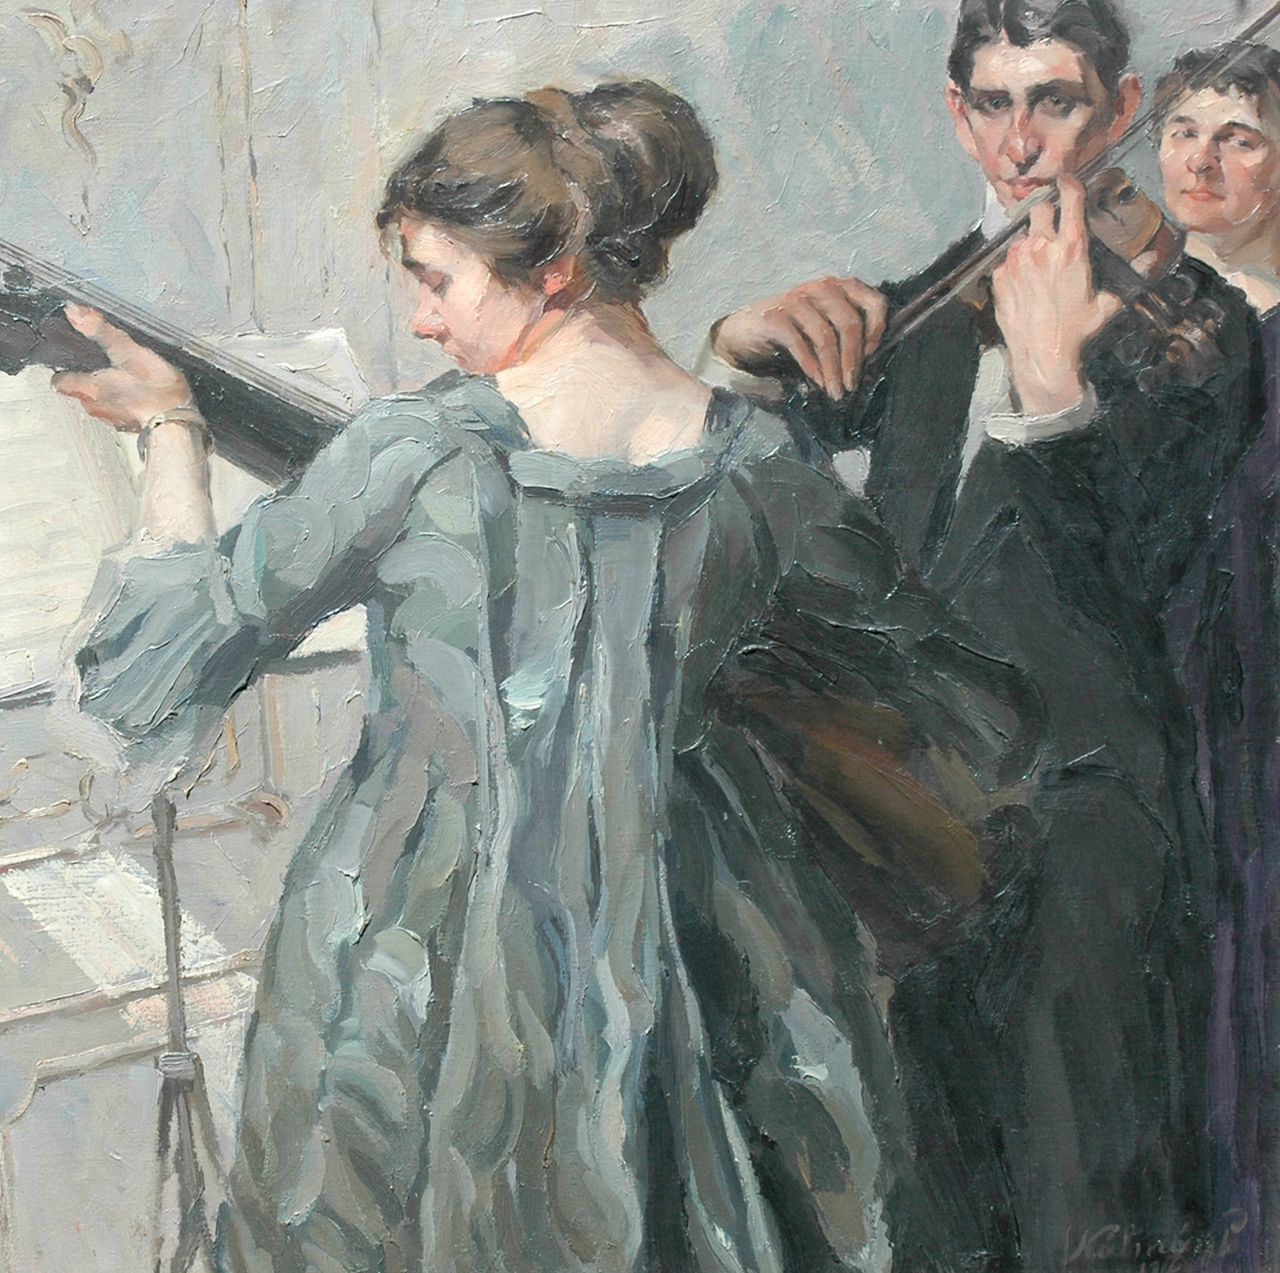 Péter Kálmán | The duet, oil on canvas, 98.6 x 98.9 cm, signed l.r. and dated 1912